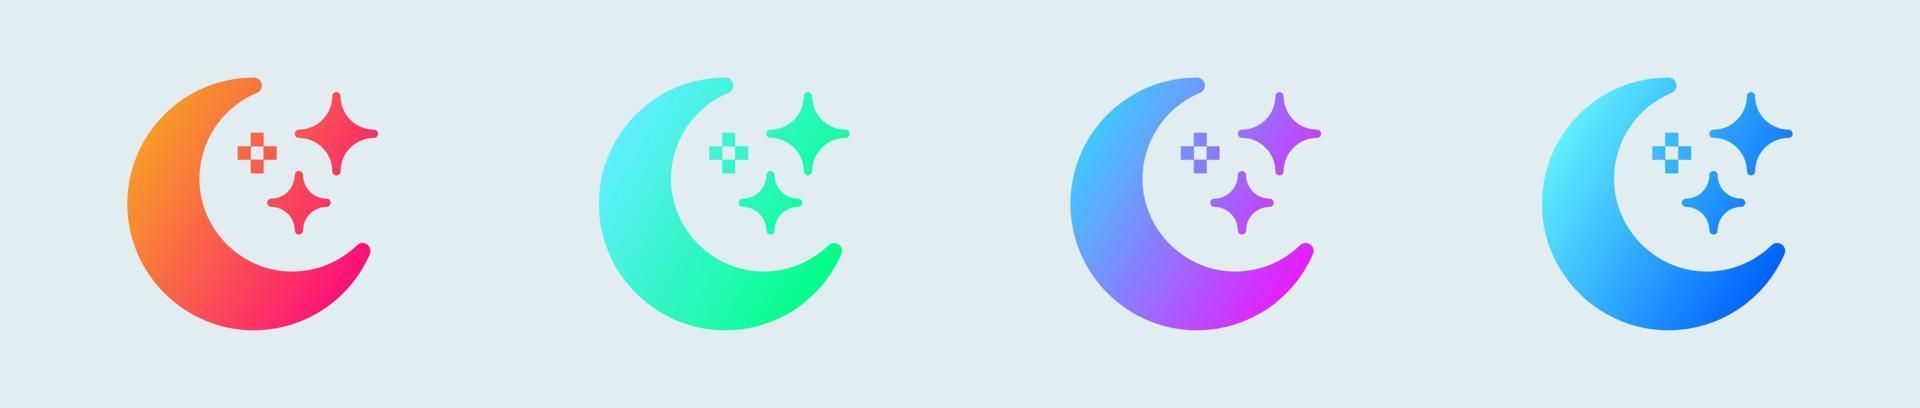 Moon solid icon in gradient colors. Crescent signs vector illustration.